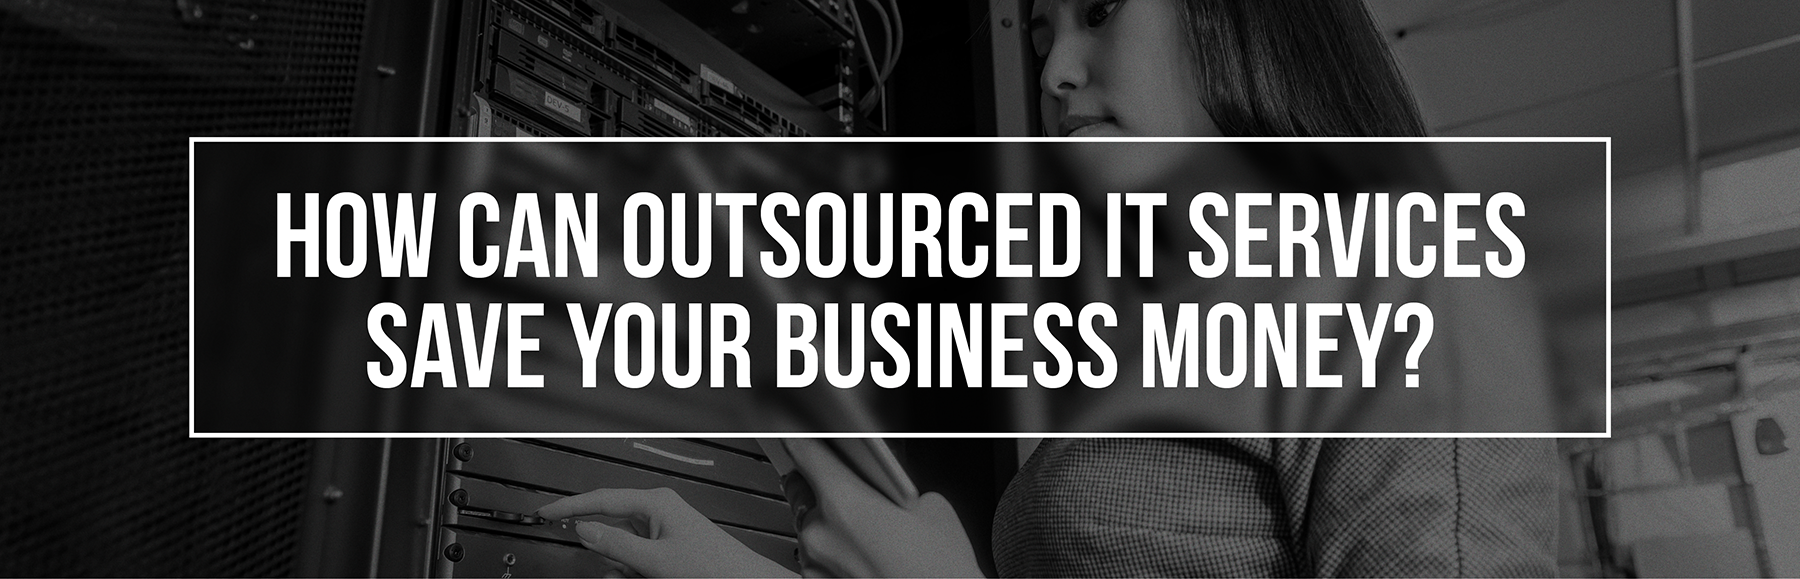 how-can-outsourced-it